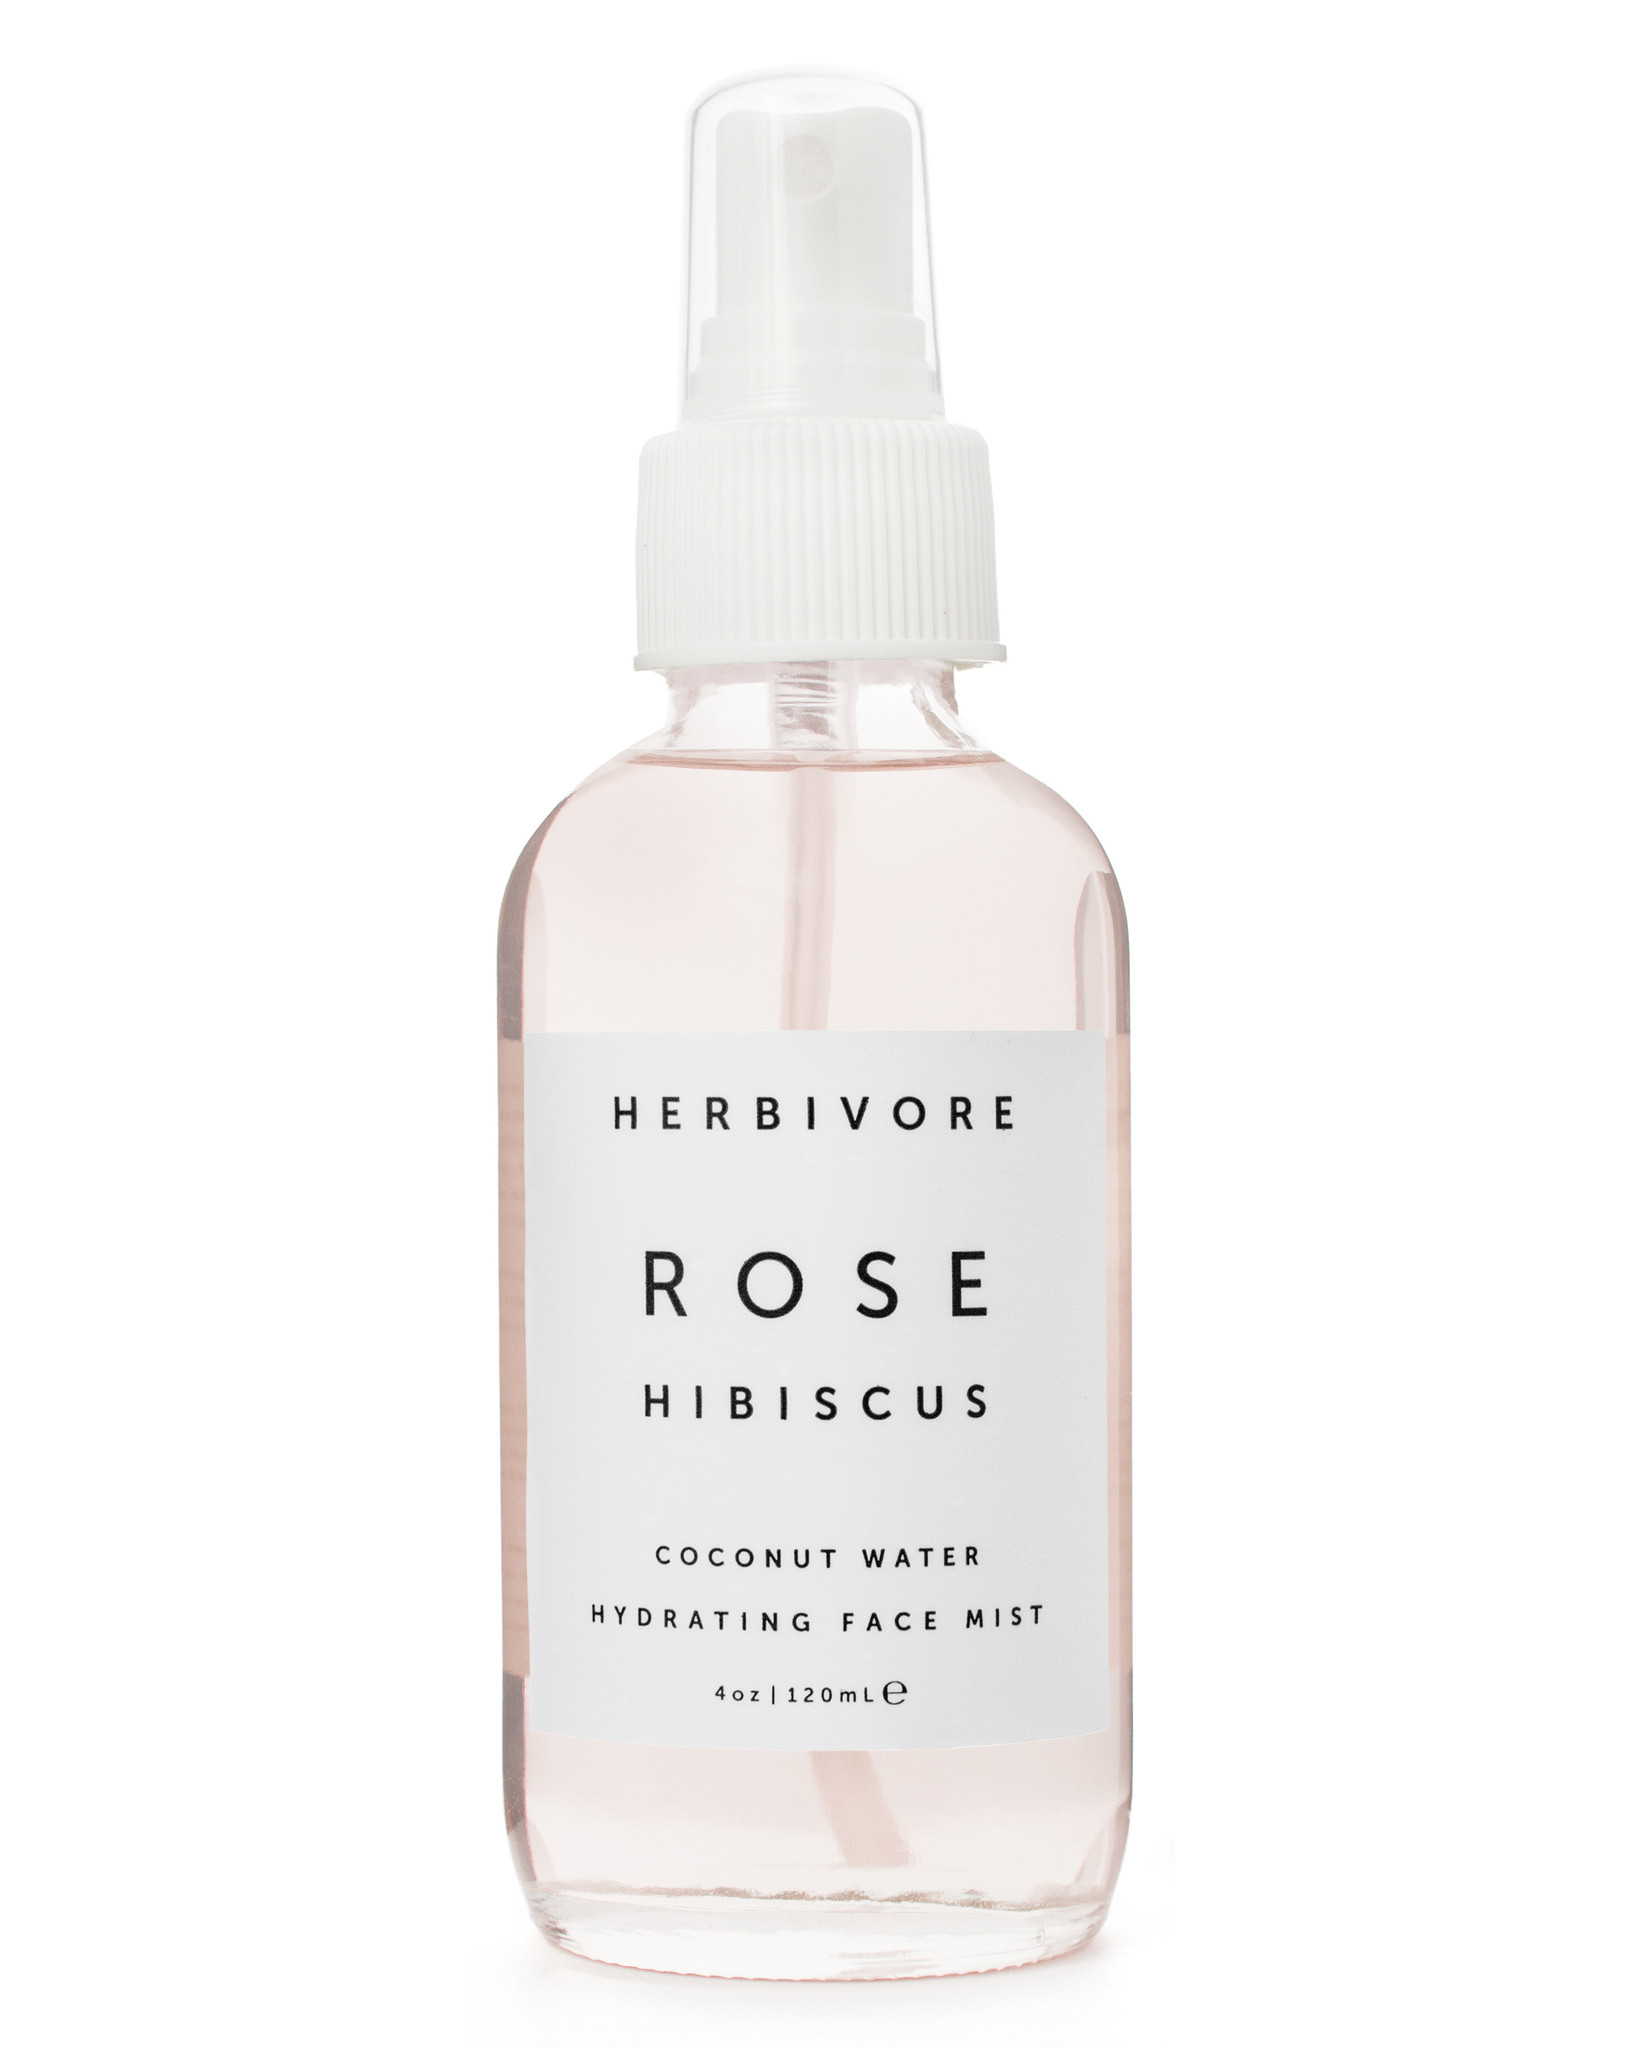 HB_RoseHibiscus_CoconutWater_HydratingFaceMist_01